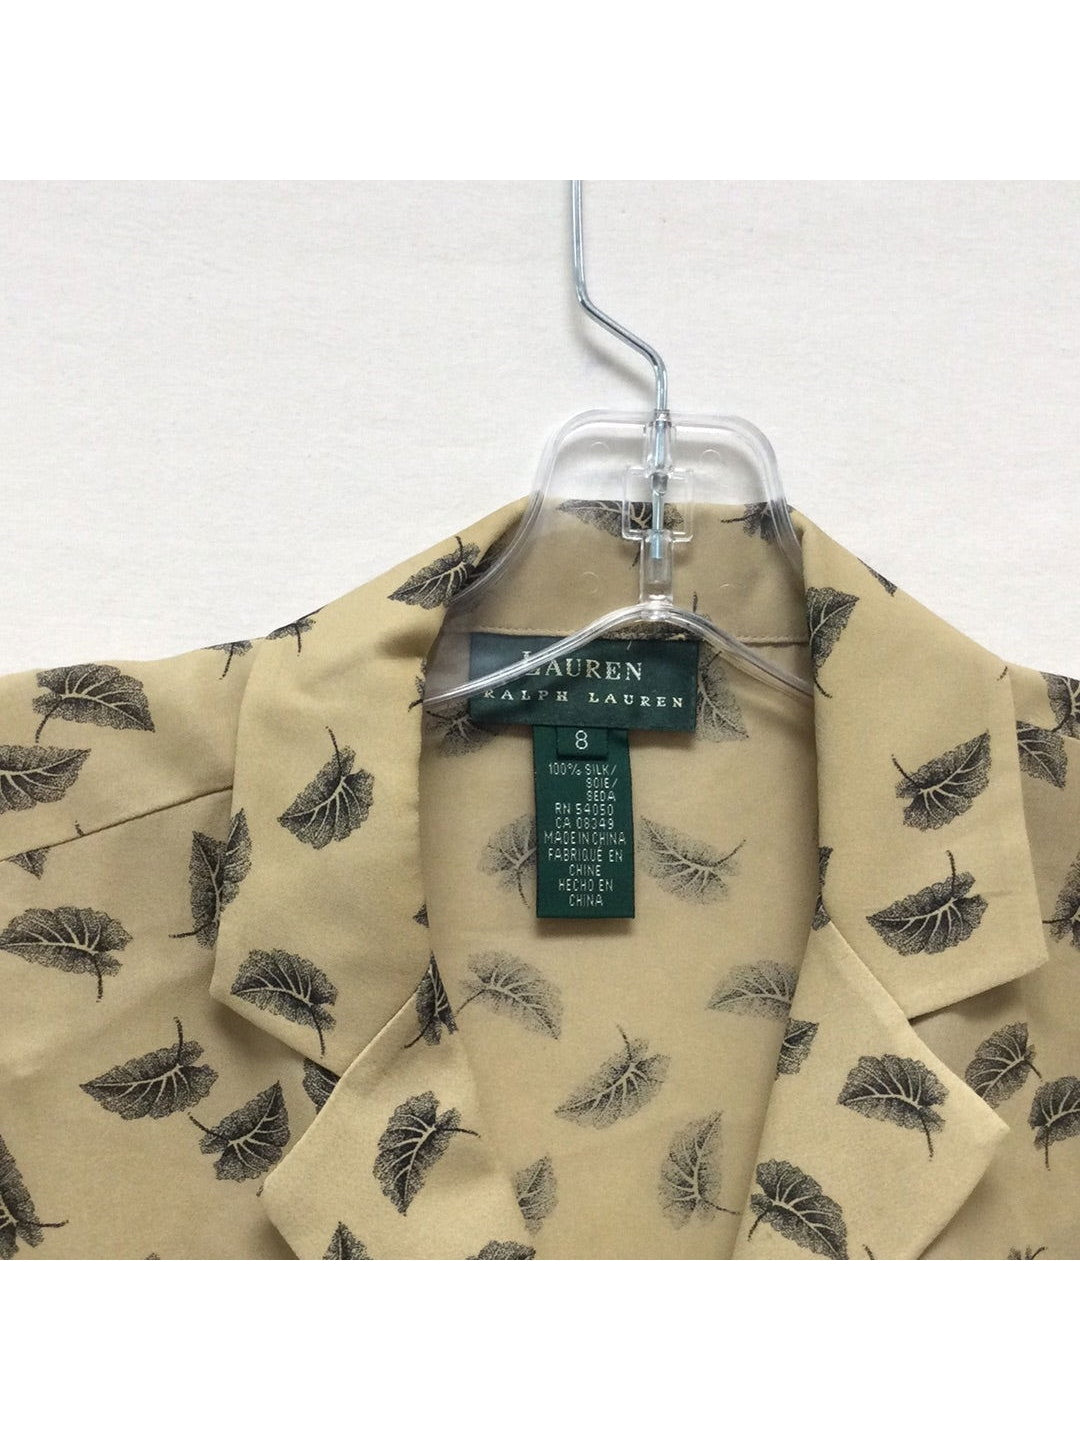 Ralph Lauren Leaf Printed Shirt - The Kennedy Collective Thrift - 